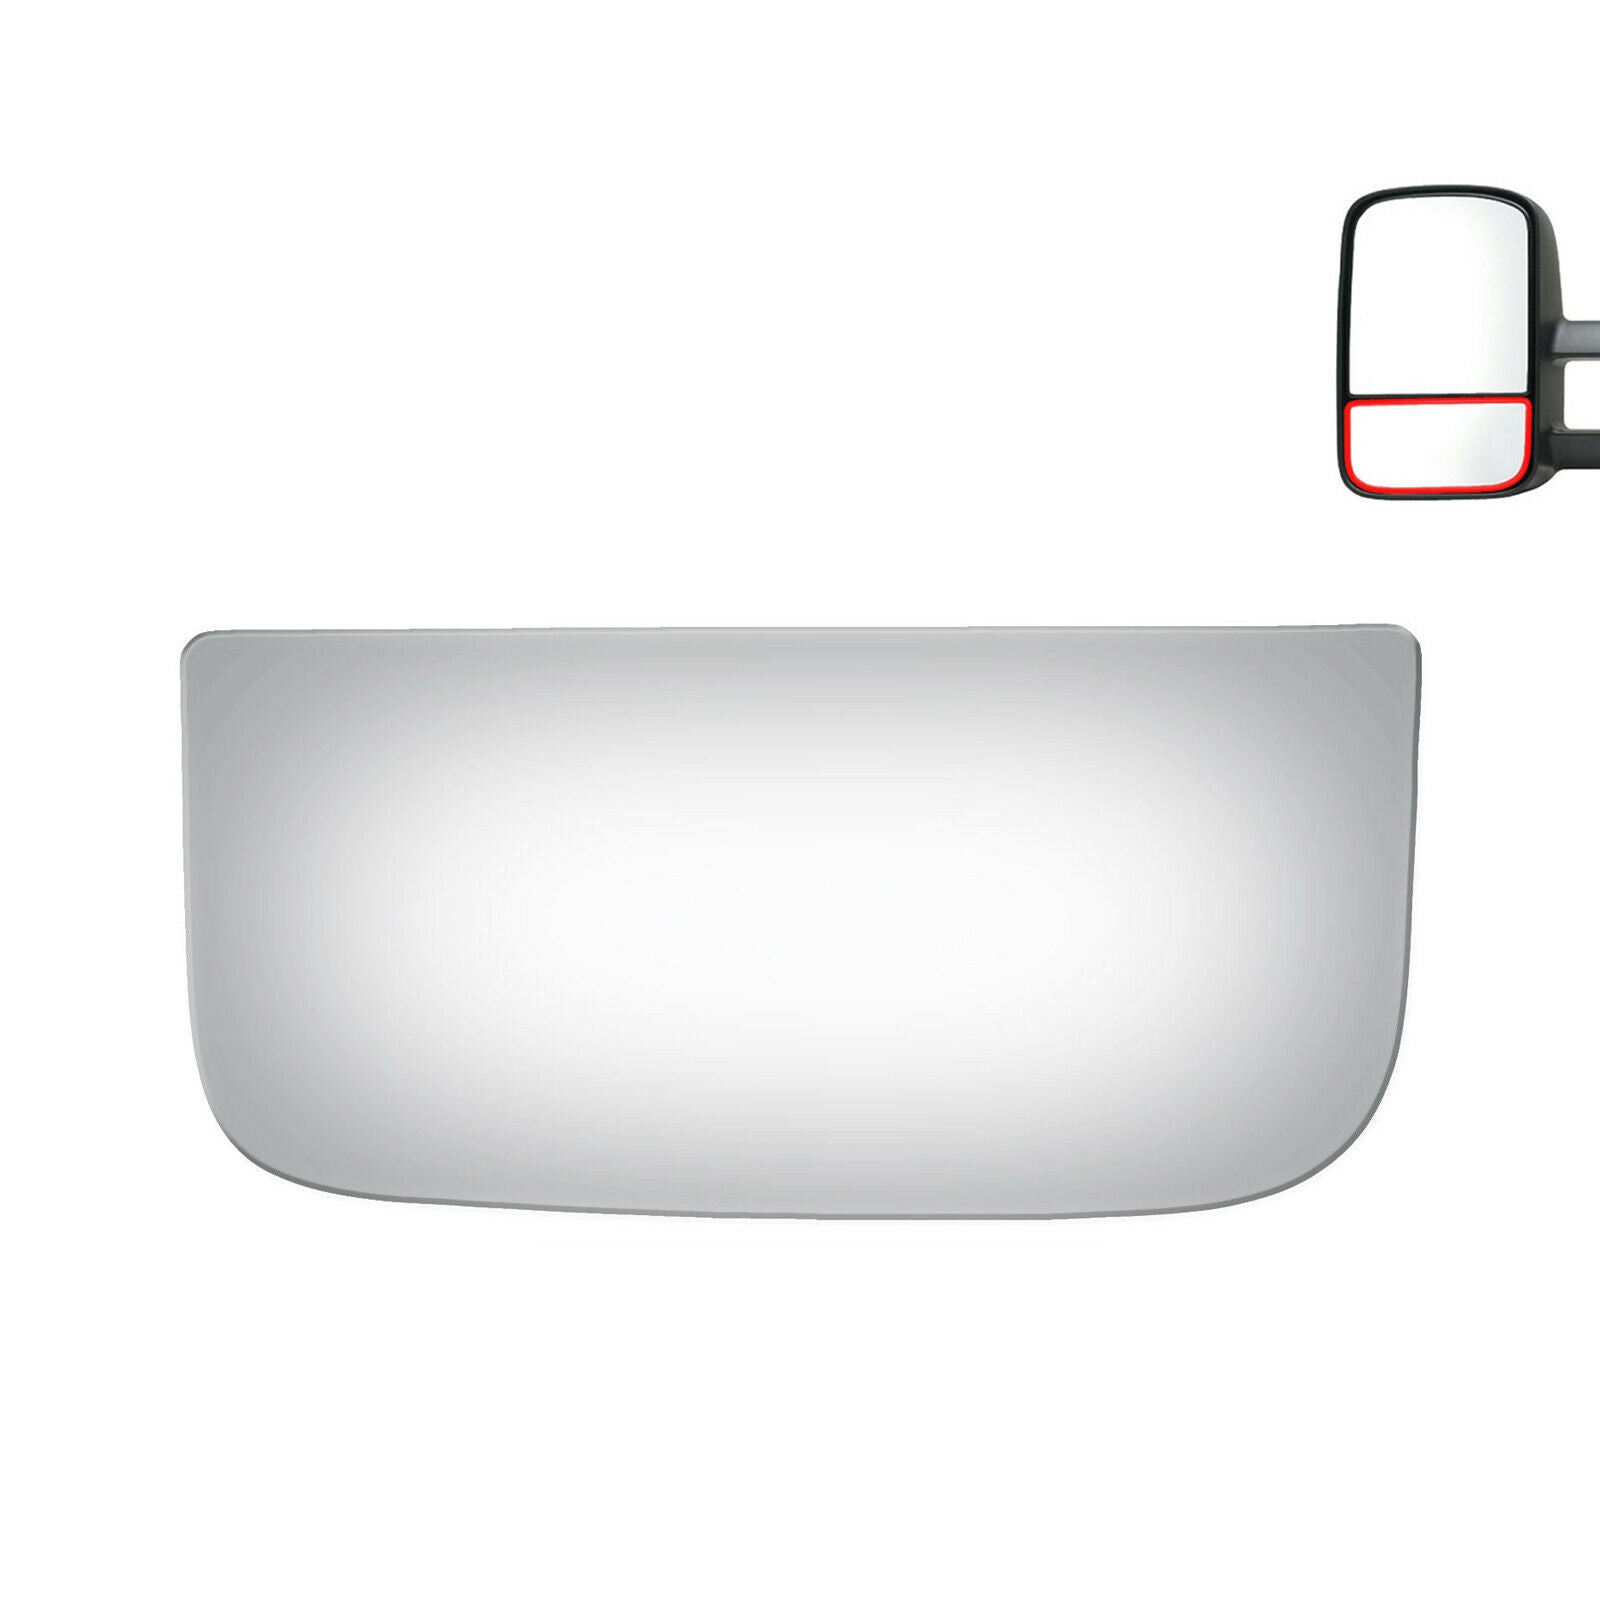 WLLW Lower Towing Mirror Glass Replace for Cadillac Escalade/ Chevrolet Avalanche Blazer Silverado Suburban Tahoe/ GMC Jimmy Sierra Yukon, Driver Left /Passenger Right /The Both Sides Convex M-0009